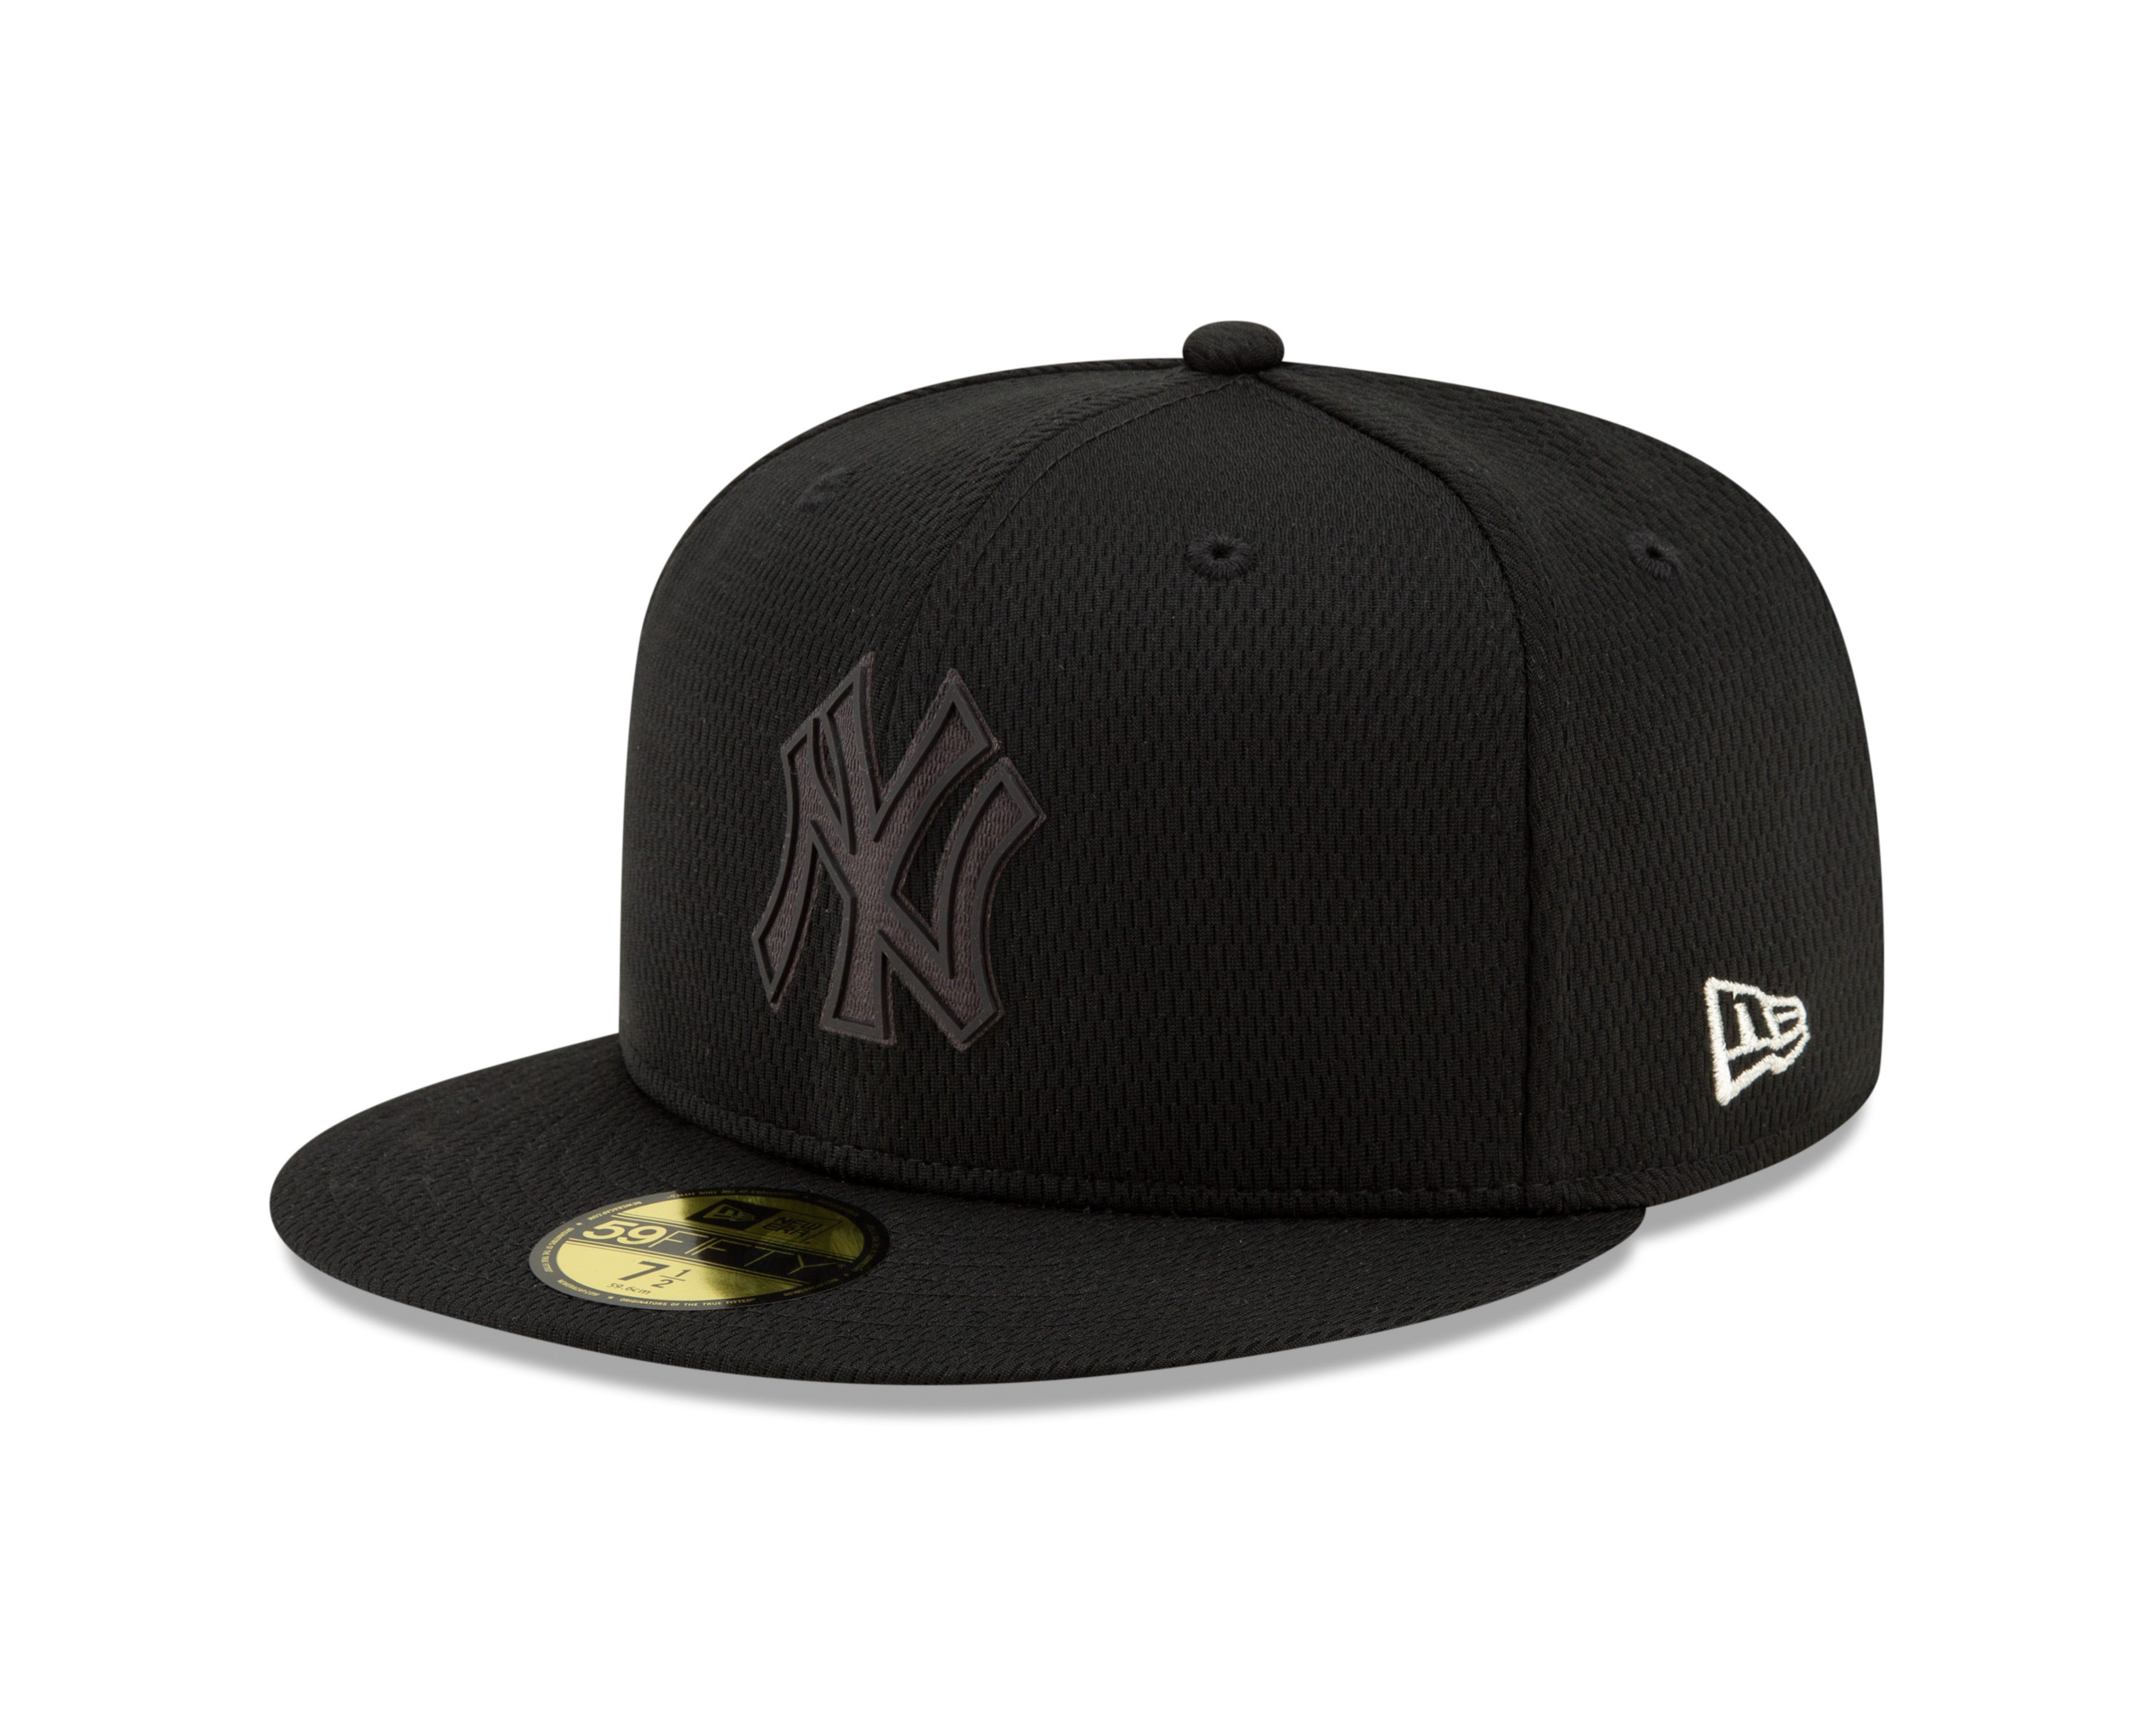 mlb players weekend hats